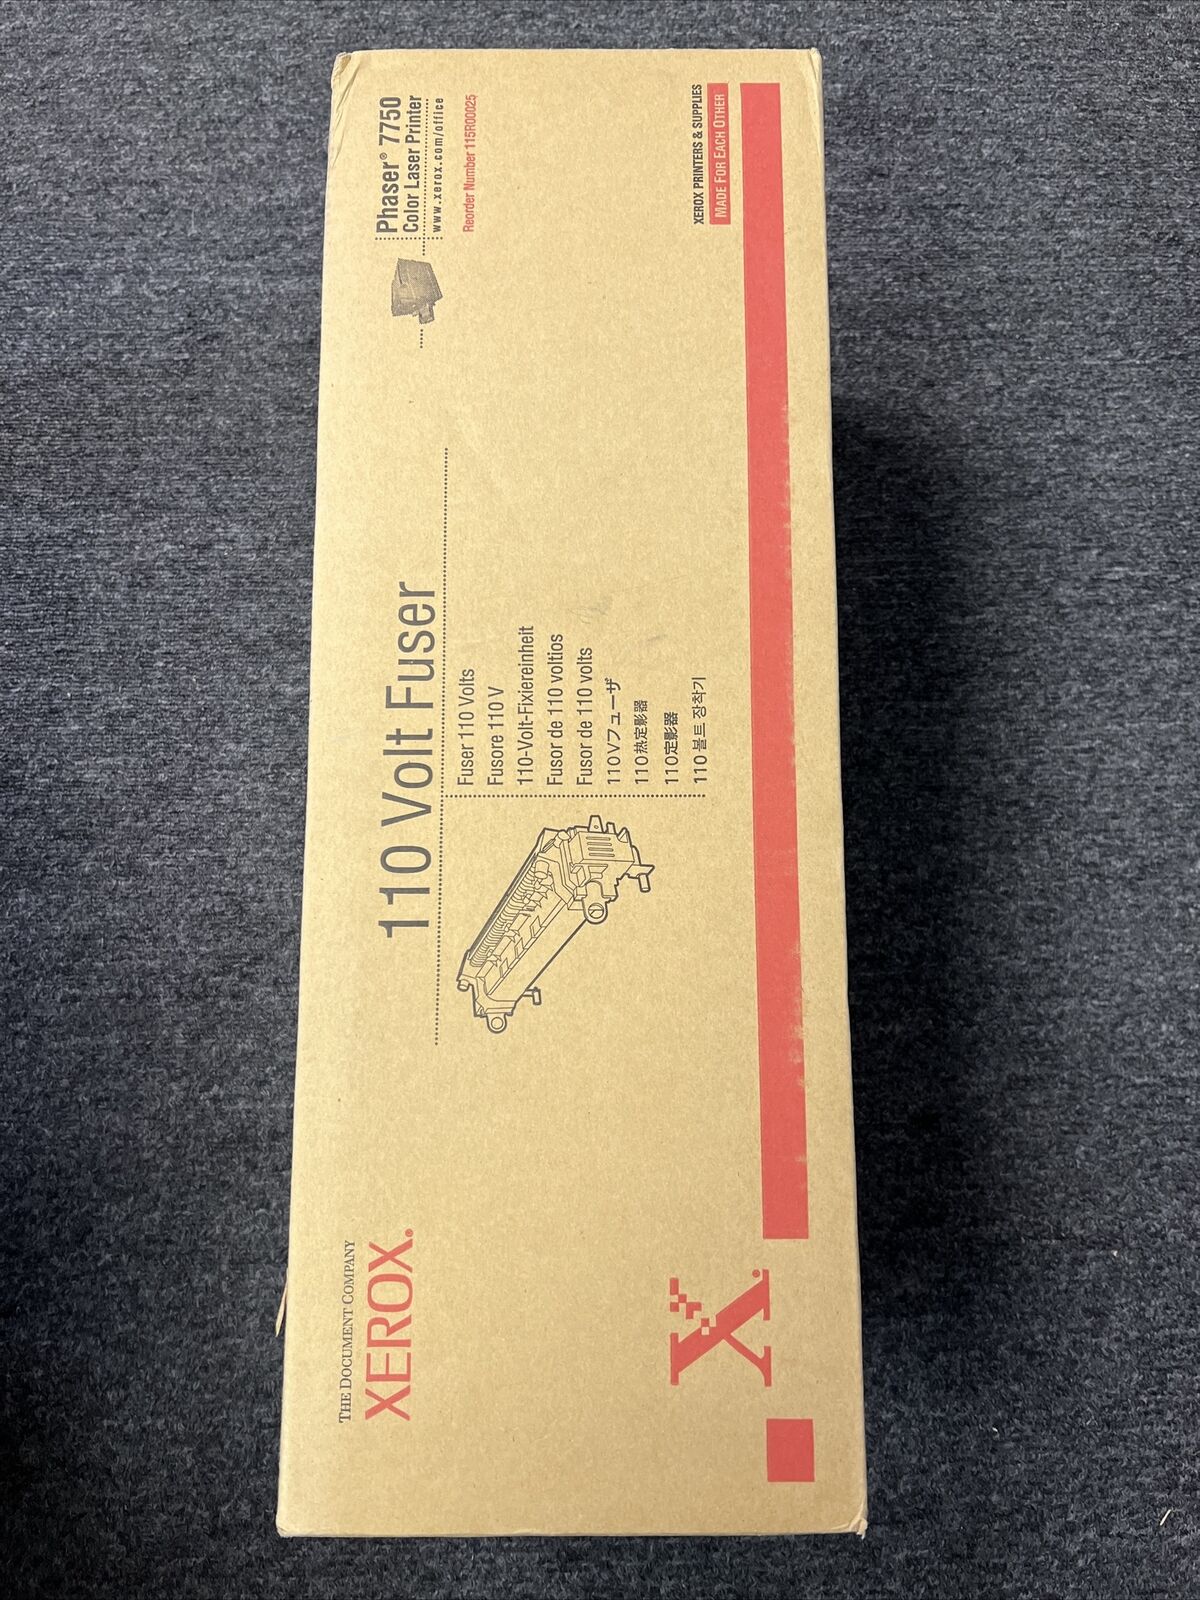 New Factory Sealed Genuine Xerox 115R00025 Phaser 7750 110 Volt Fuser